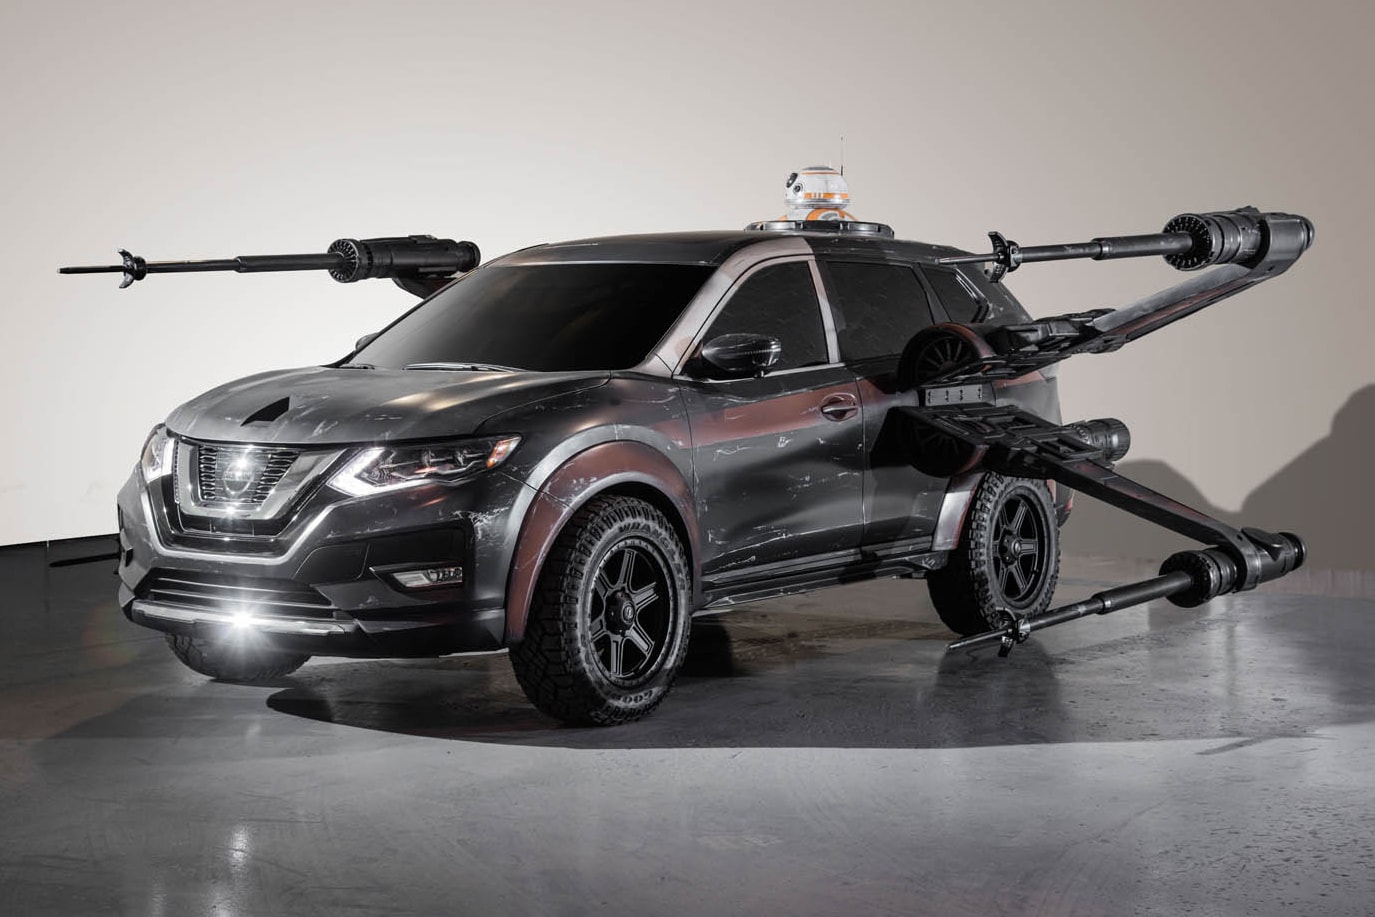 Nissan Star Wars The Last Jedi Concept Vehicles Cars maxima la los angeles auto show automotive altima TIE Fighter Kylo Ren captain phaser Silencer spacecraft spaceship Rouge Poe Dameron X-wing BB-8 A-wing